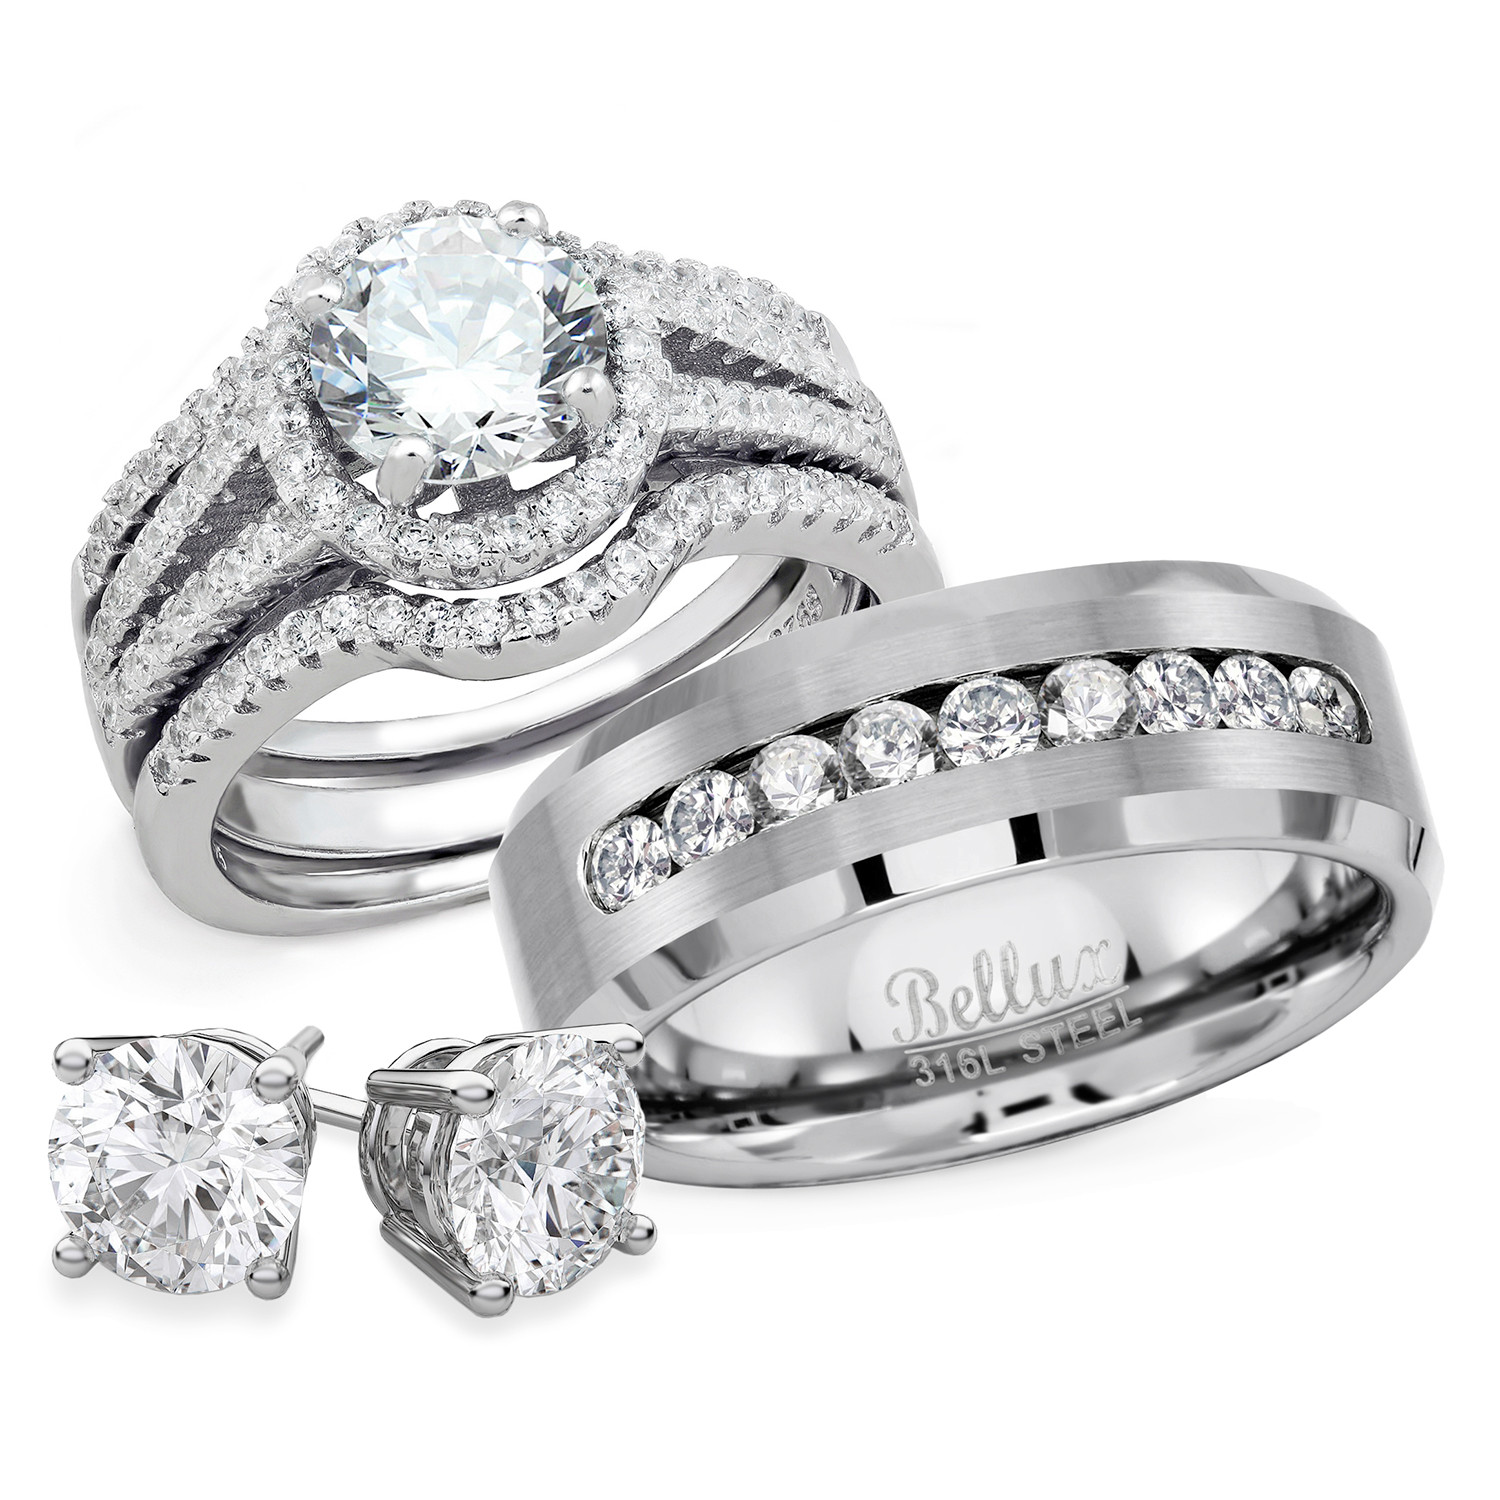 Wedding Band Sets Walmart
 Bellux Style His and Hers Wedding Engagement Anniversary